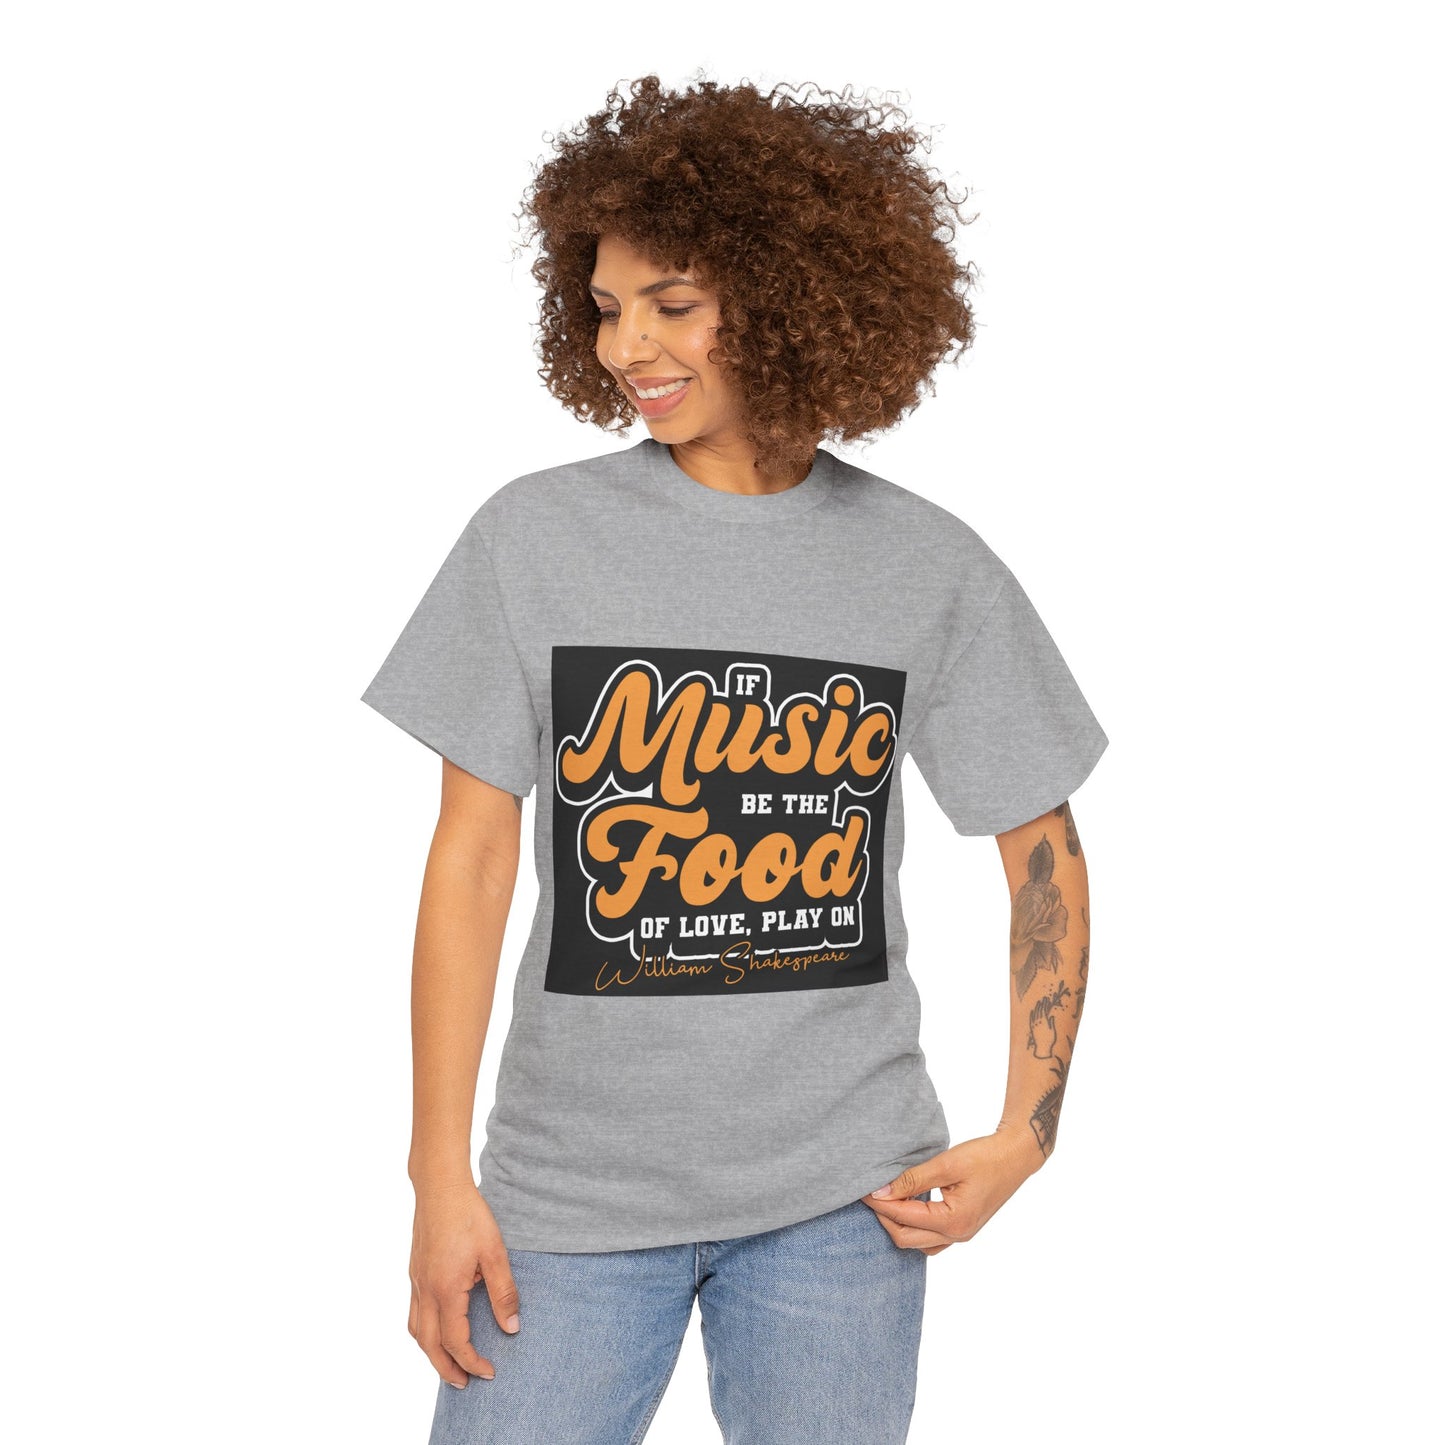 The Free Spirit T-Shirt: If music be the food of love, play on